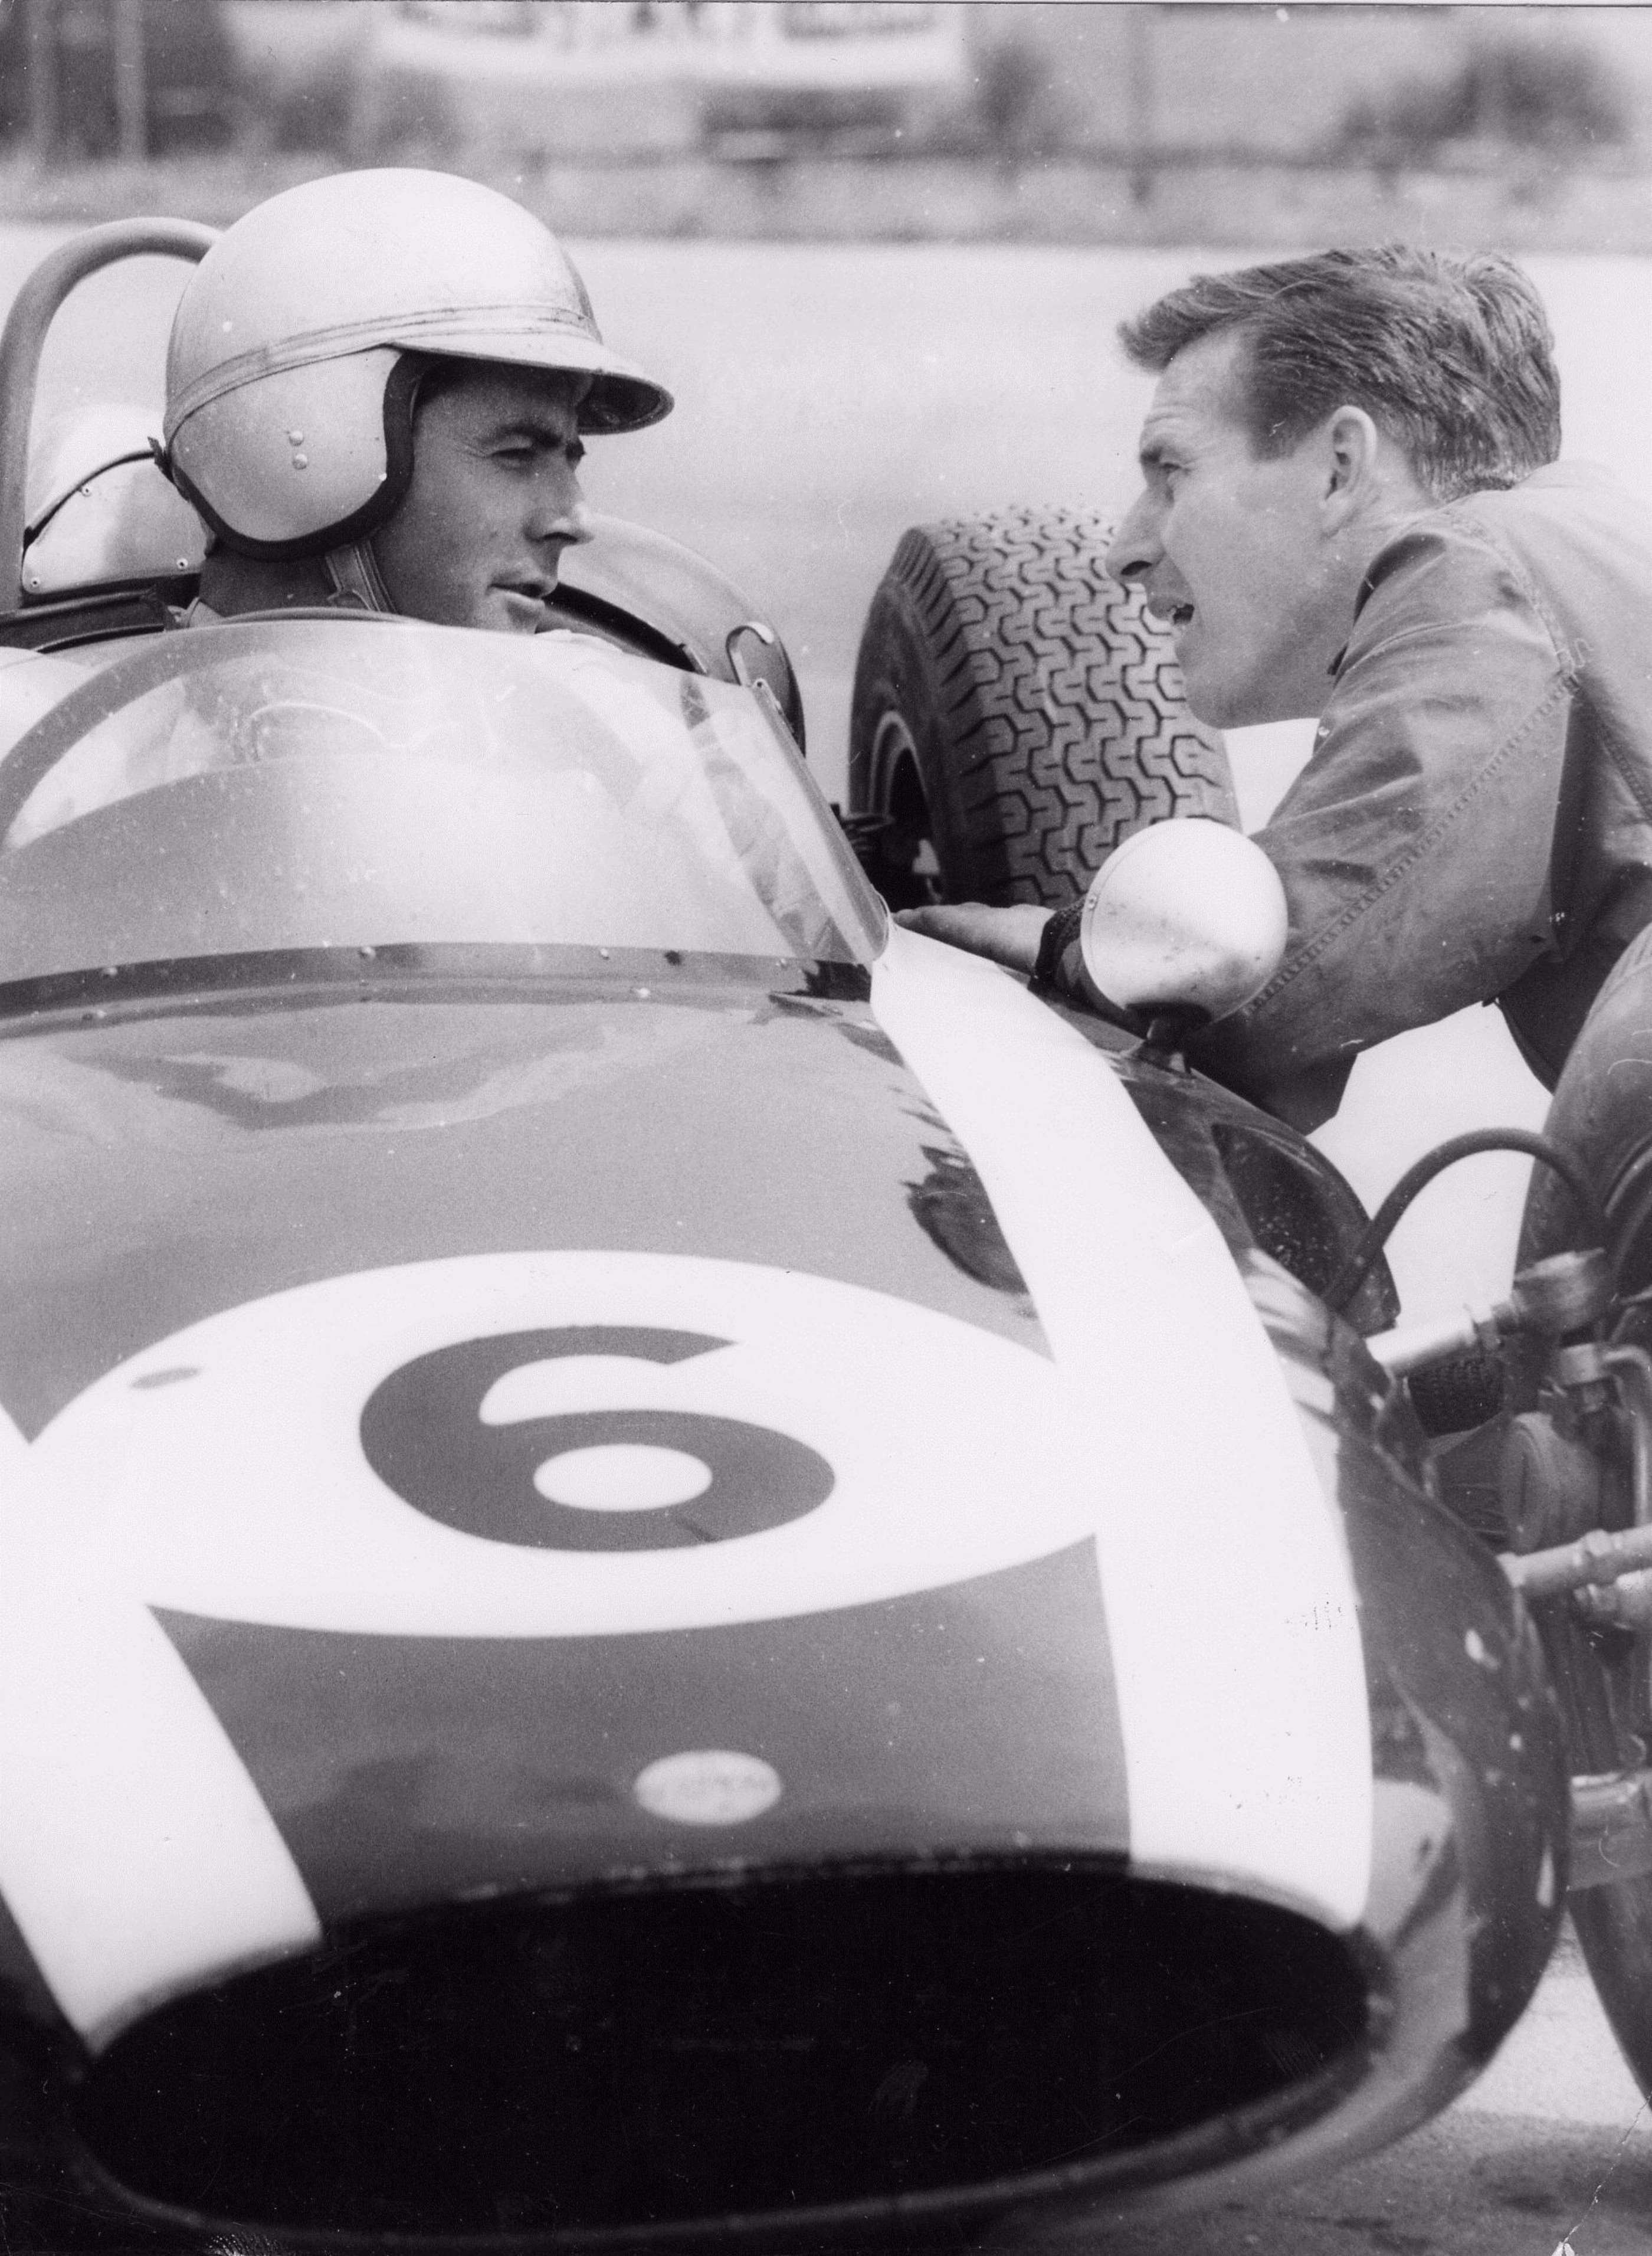 Jack Brabham testing at Goodwood in his private Cooper - with personal mechanic Timmy Wall